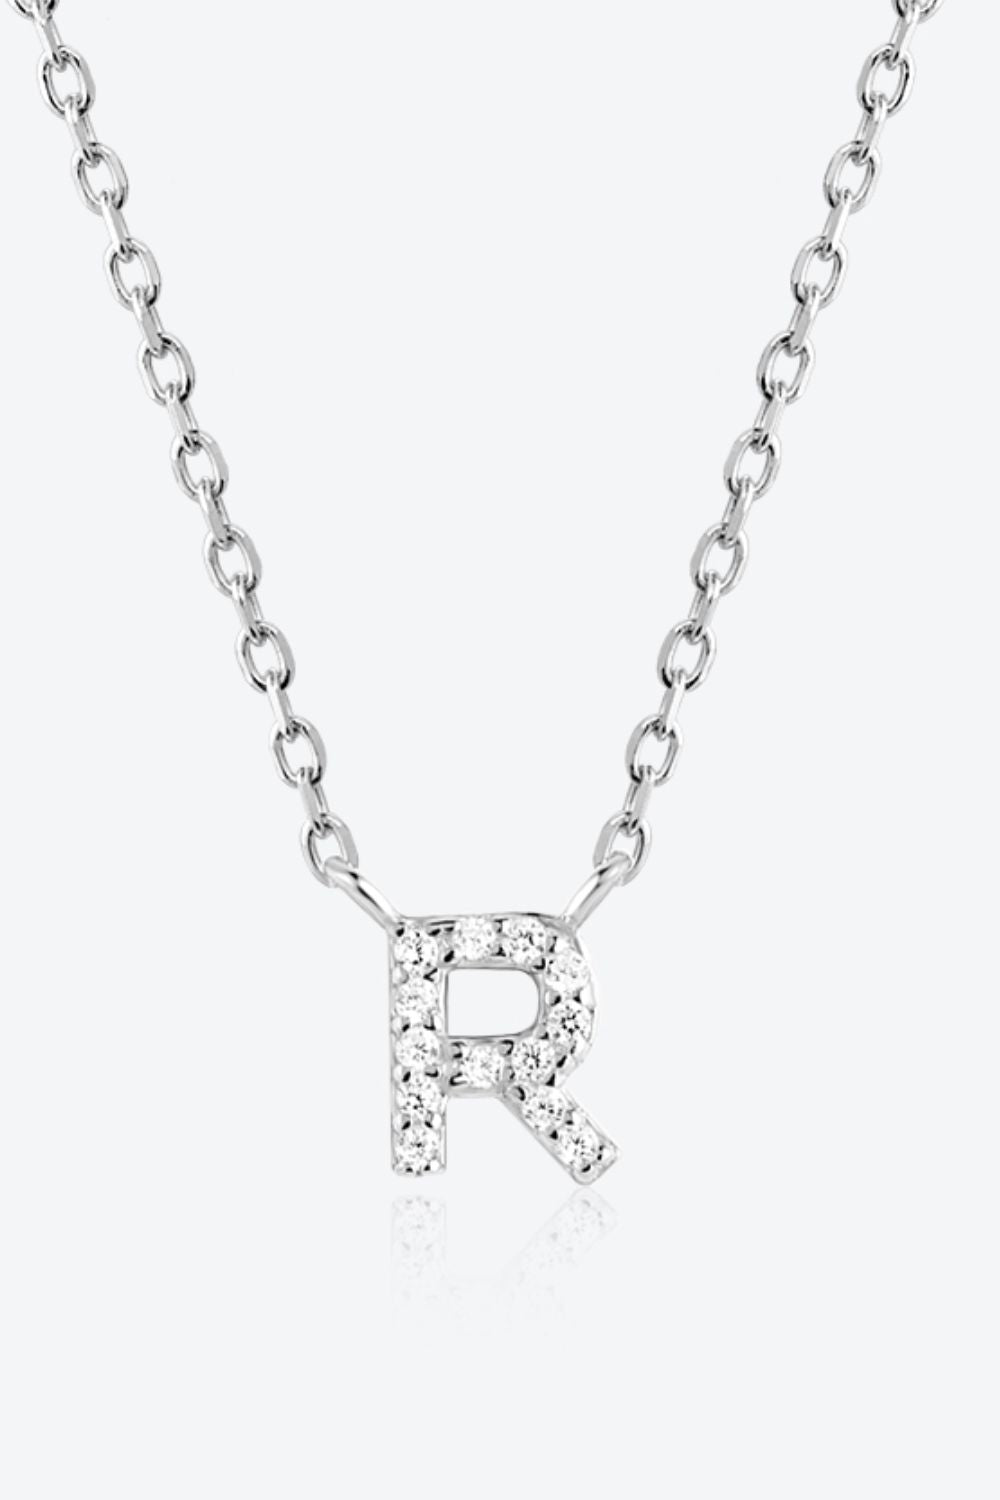 Q To U Zircon 925 Sterling Silver Necklace king-general-store-5710.myshopify.com